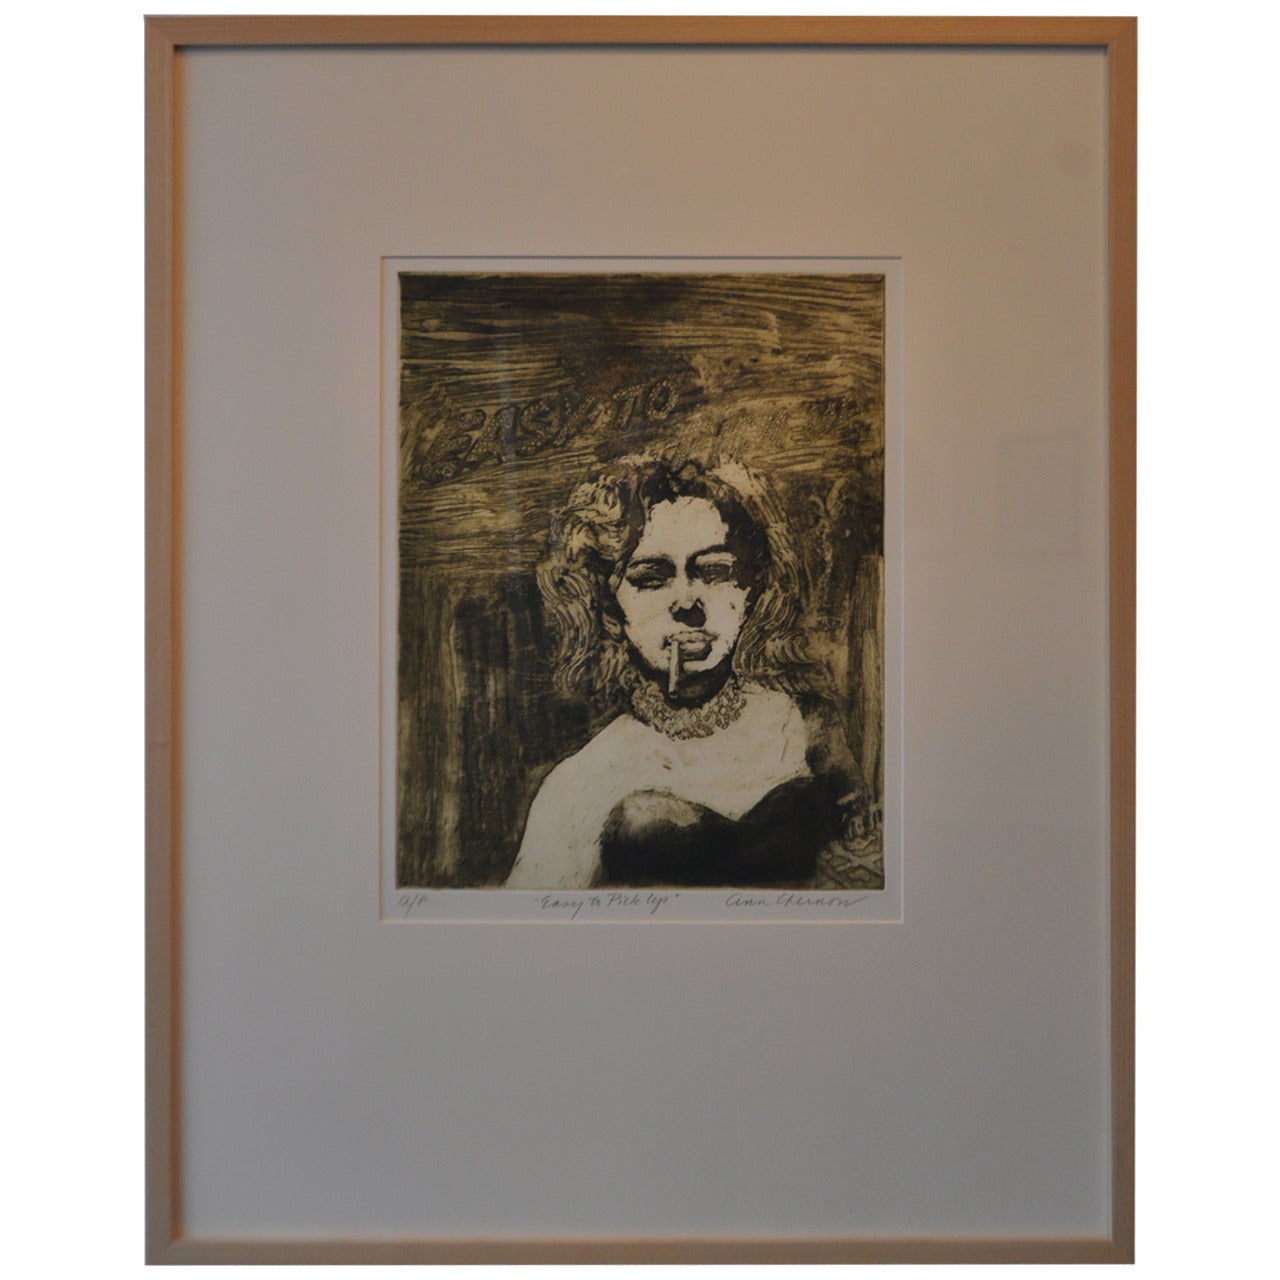 Ann Chernow "Easy to Pick Up" Etching, Aquatint, and Photogravure For Sale